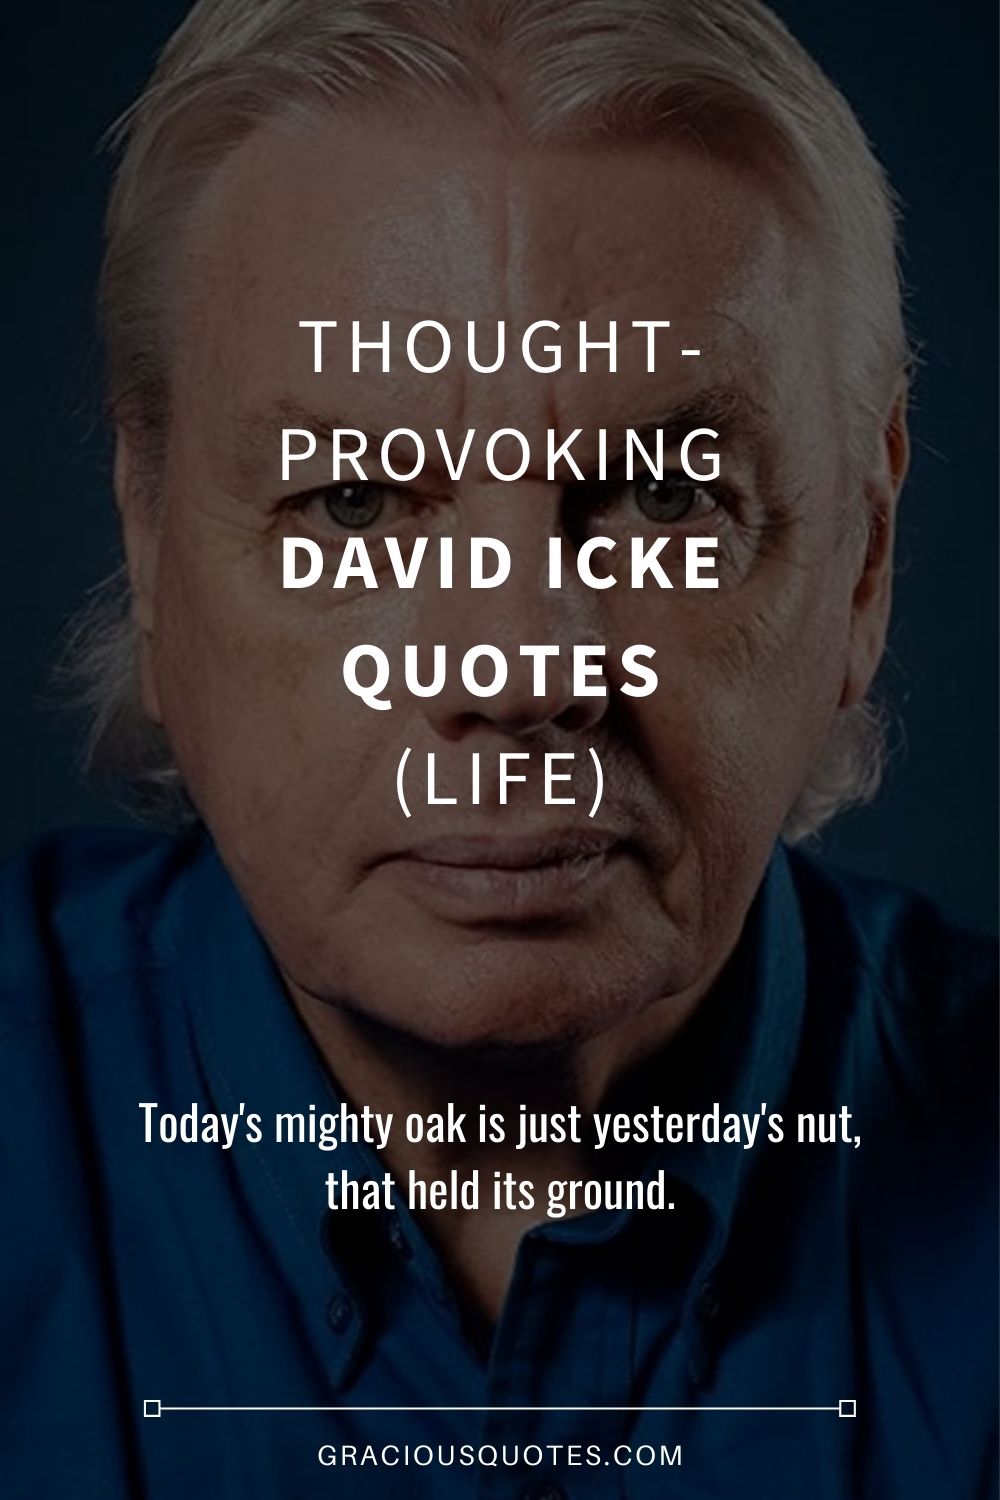 Thought-provoking David Icke Quotes (LIFE) - Gracious Quotes